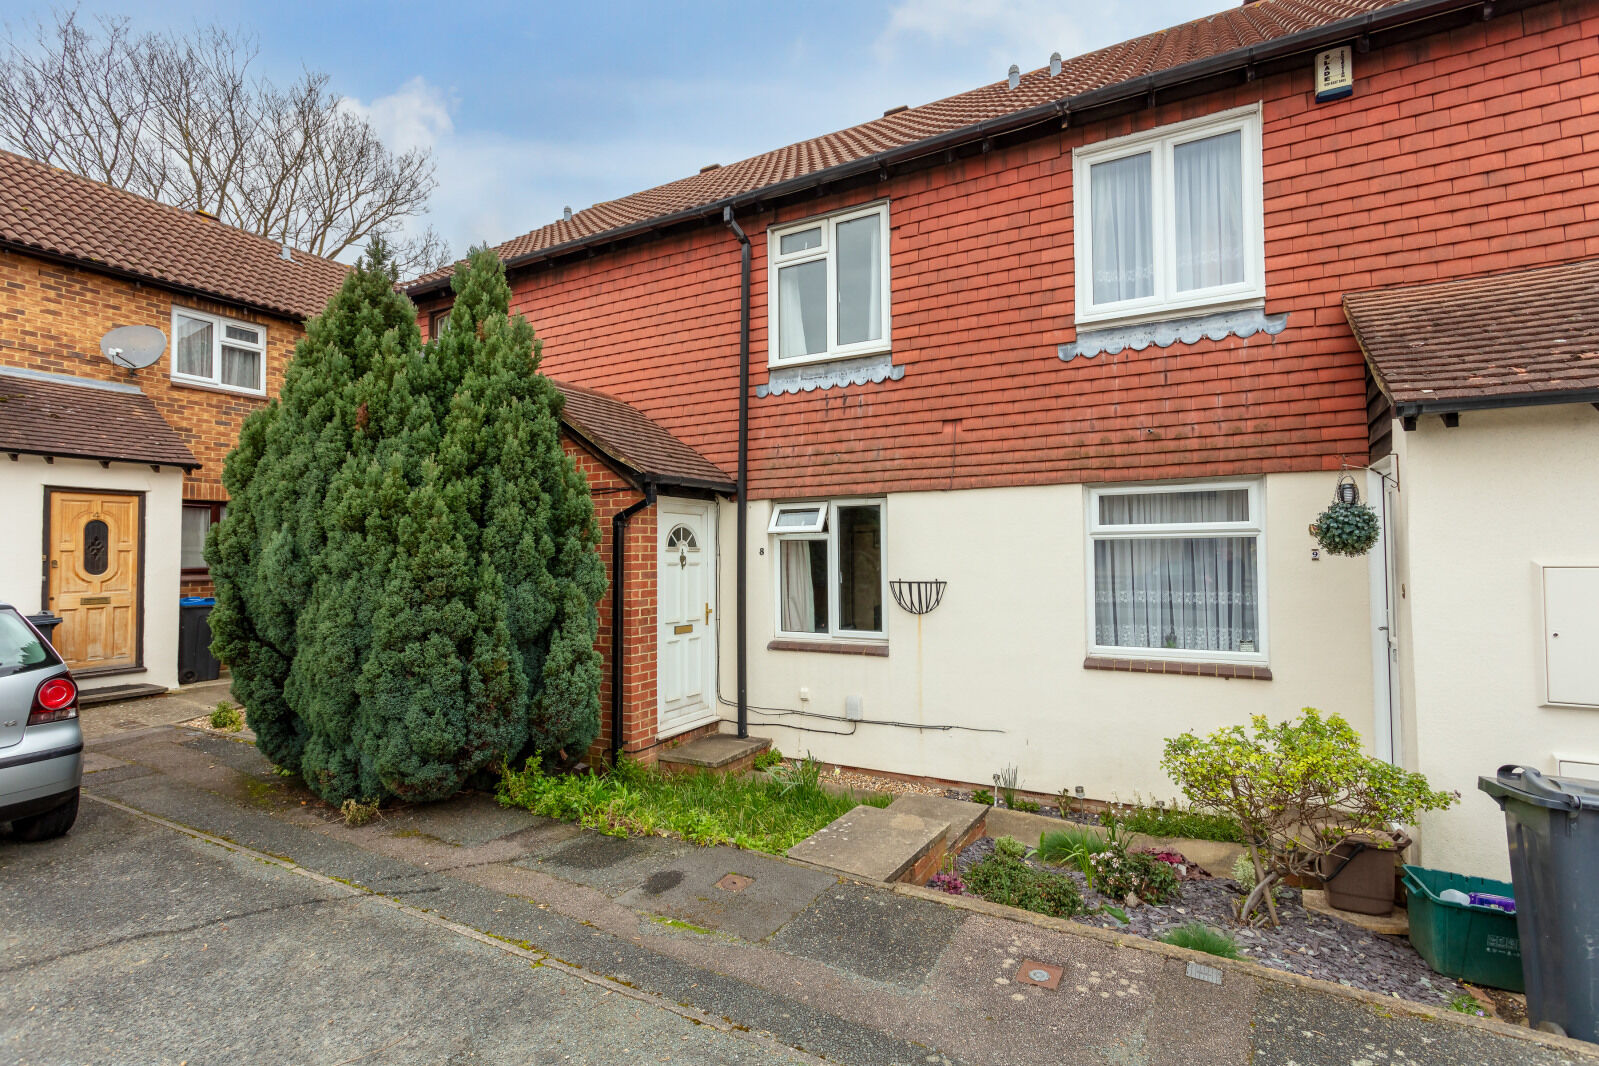 2 bedroom mid terraced house for sale Connaught Gardens, Morden, SM4, main image